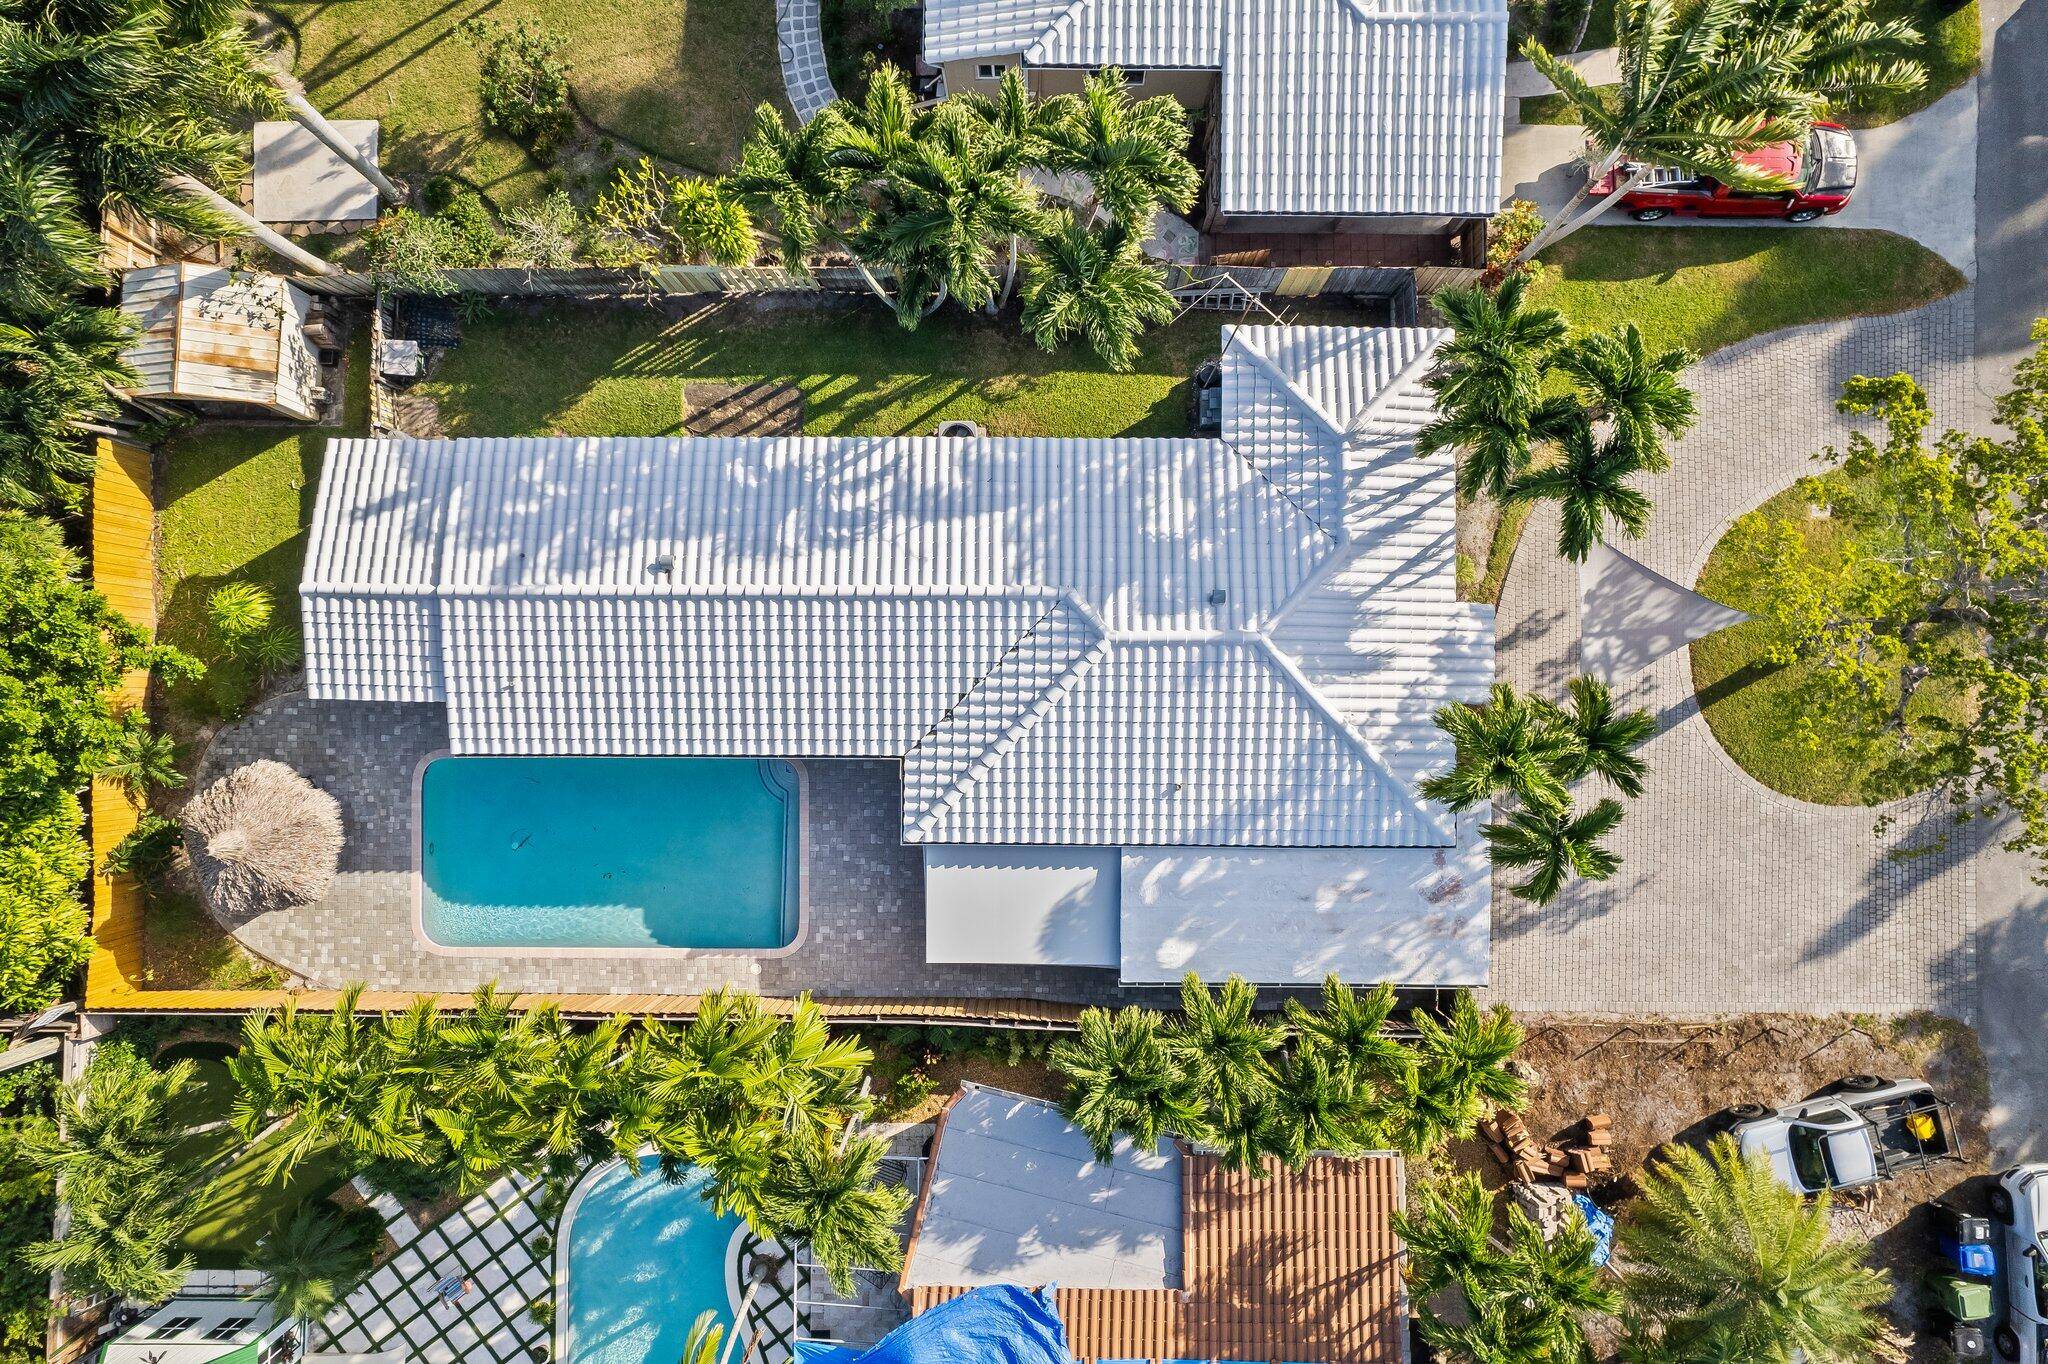 4 5 bedroom, 2 bathroom Pool home situated on a PRIME 7, 433 square foot fully fenced Private lot in the sought after community of Poinsettia Heights in Fort Lauderdale.